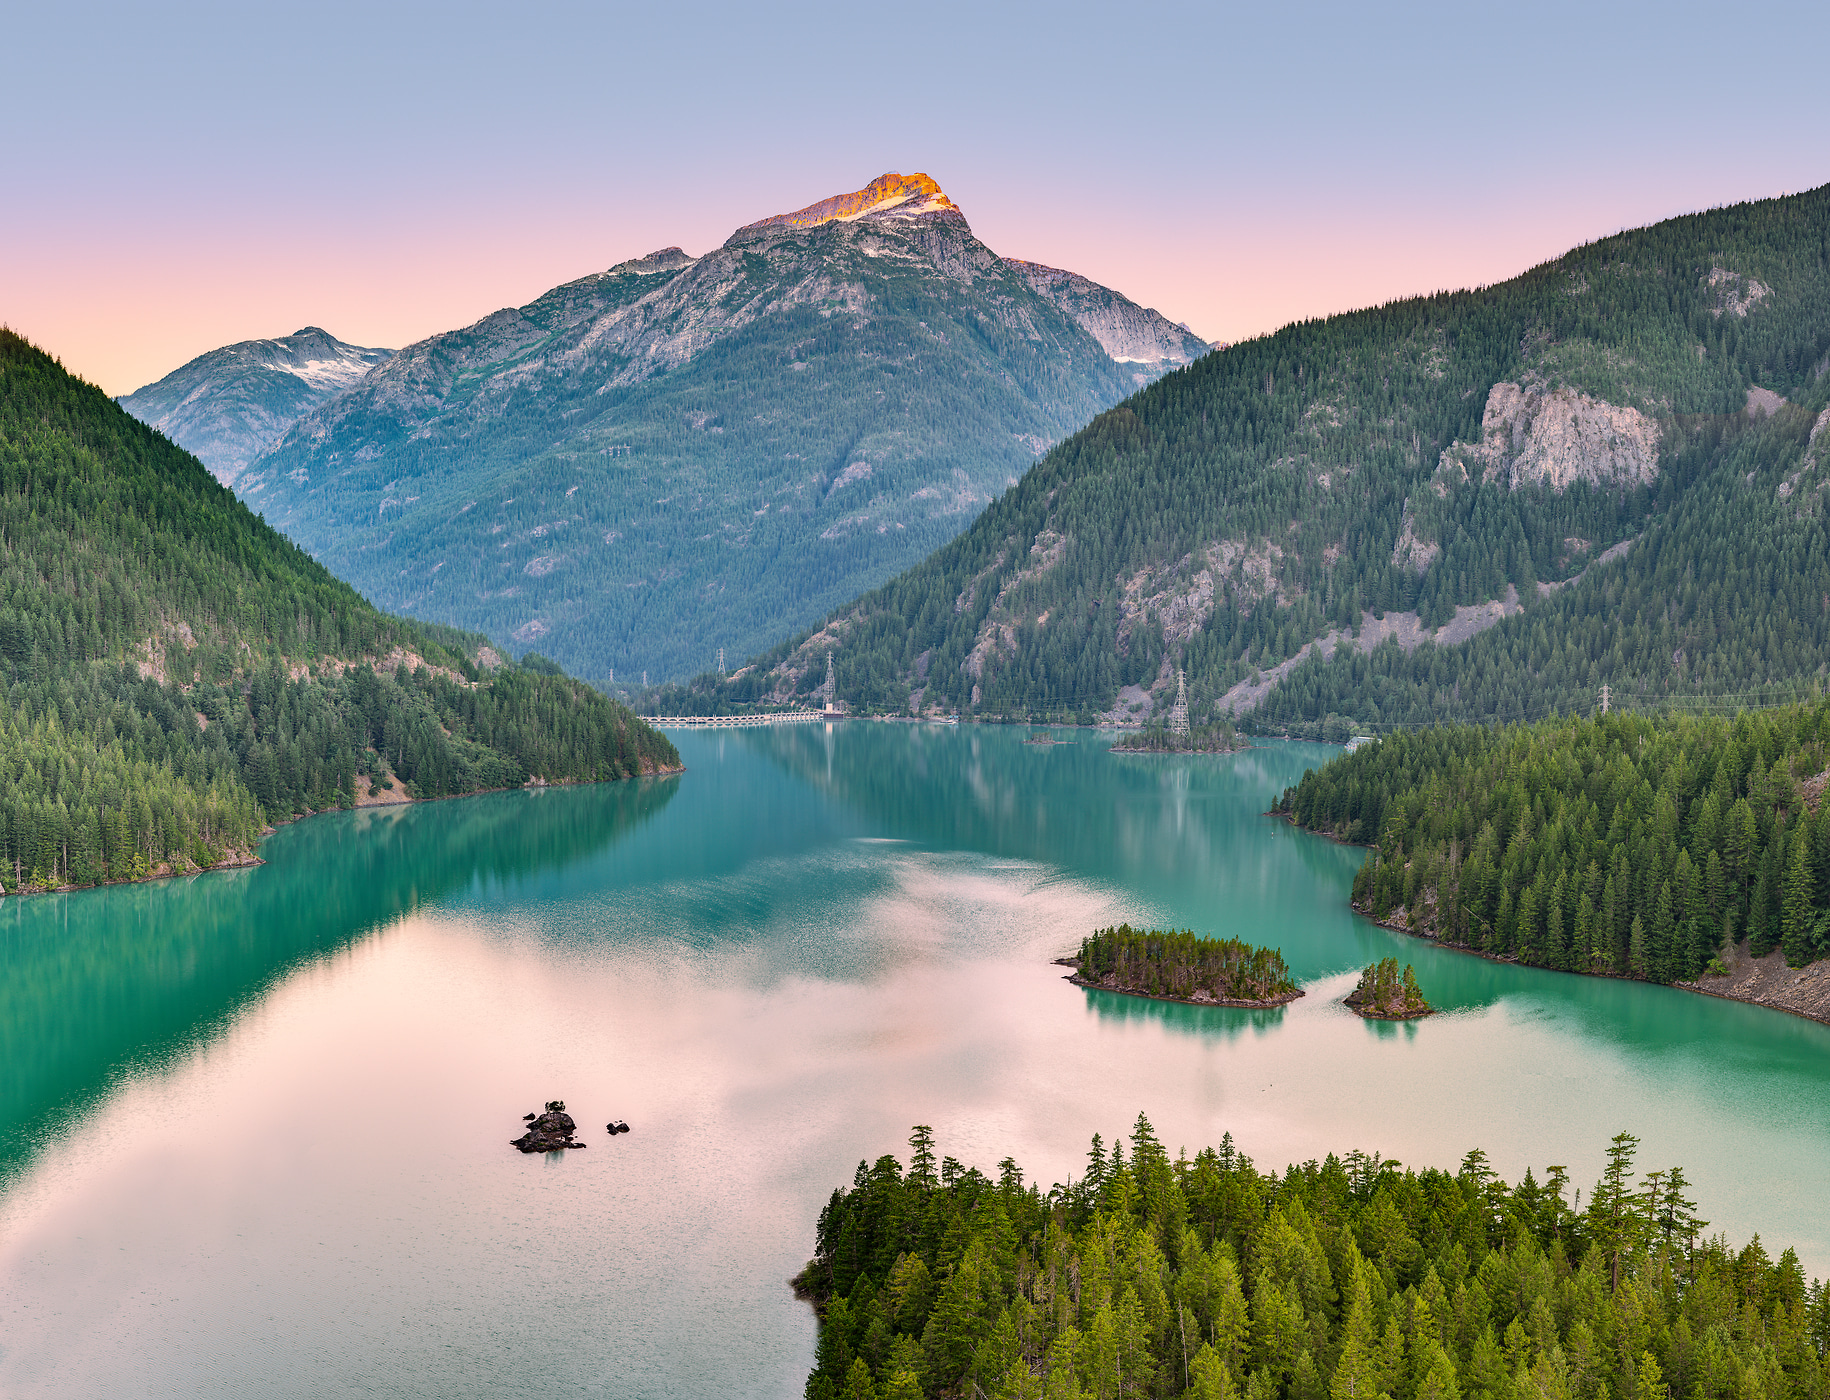 721 megapixels! A very high resolution, large-format VAST photo print of a lake and mountains; landscape photograph created by Chris Blake in Diablo Lake, North Cascades National Park